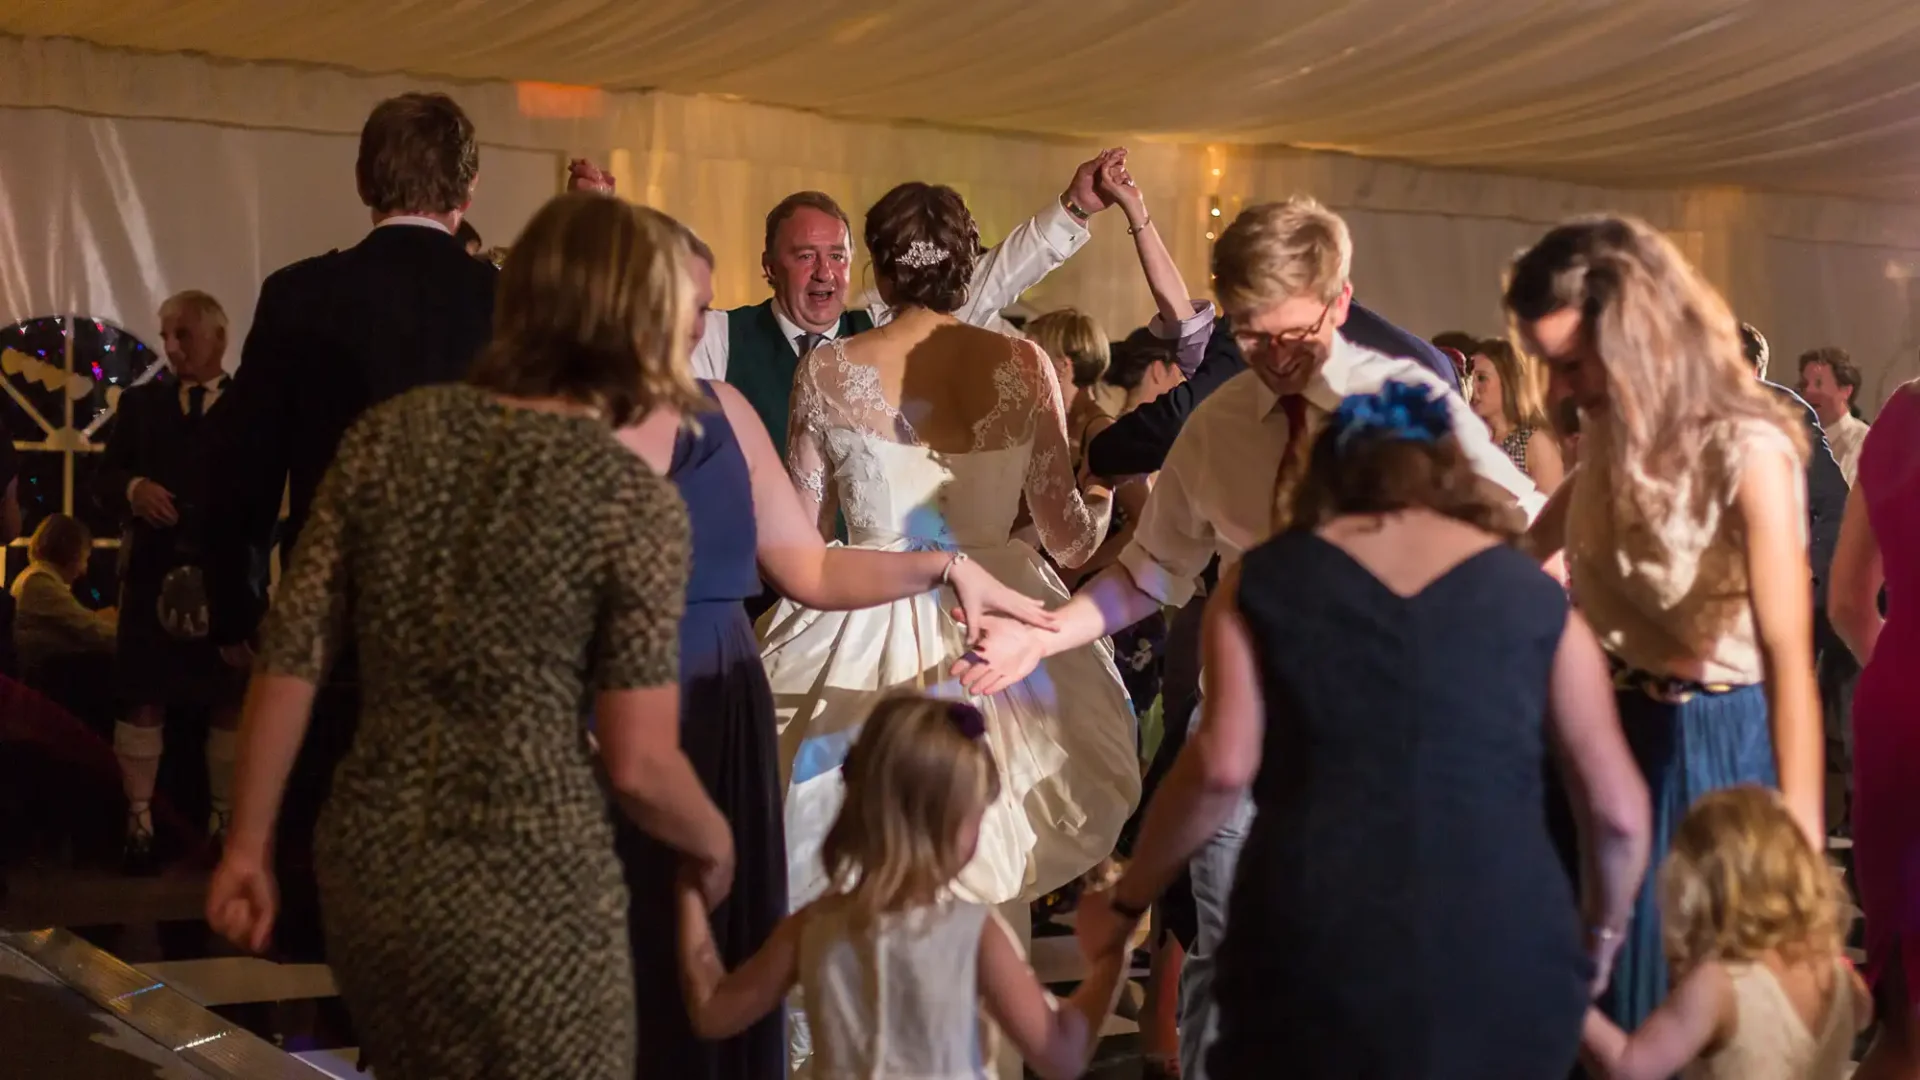 Guests dancing joyously at a wedding reception inside a tent, with a bride in a lacy dress dancing at the center.